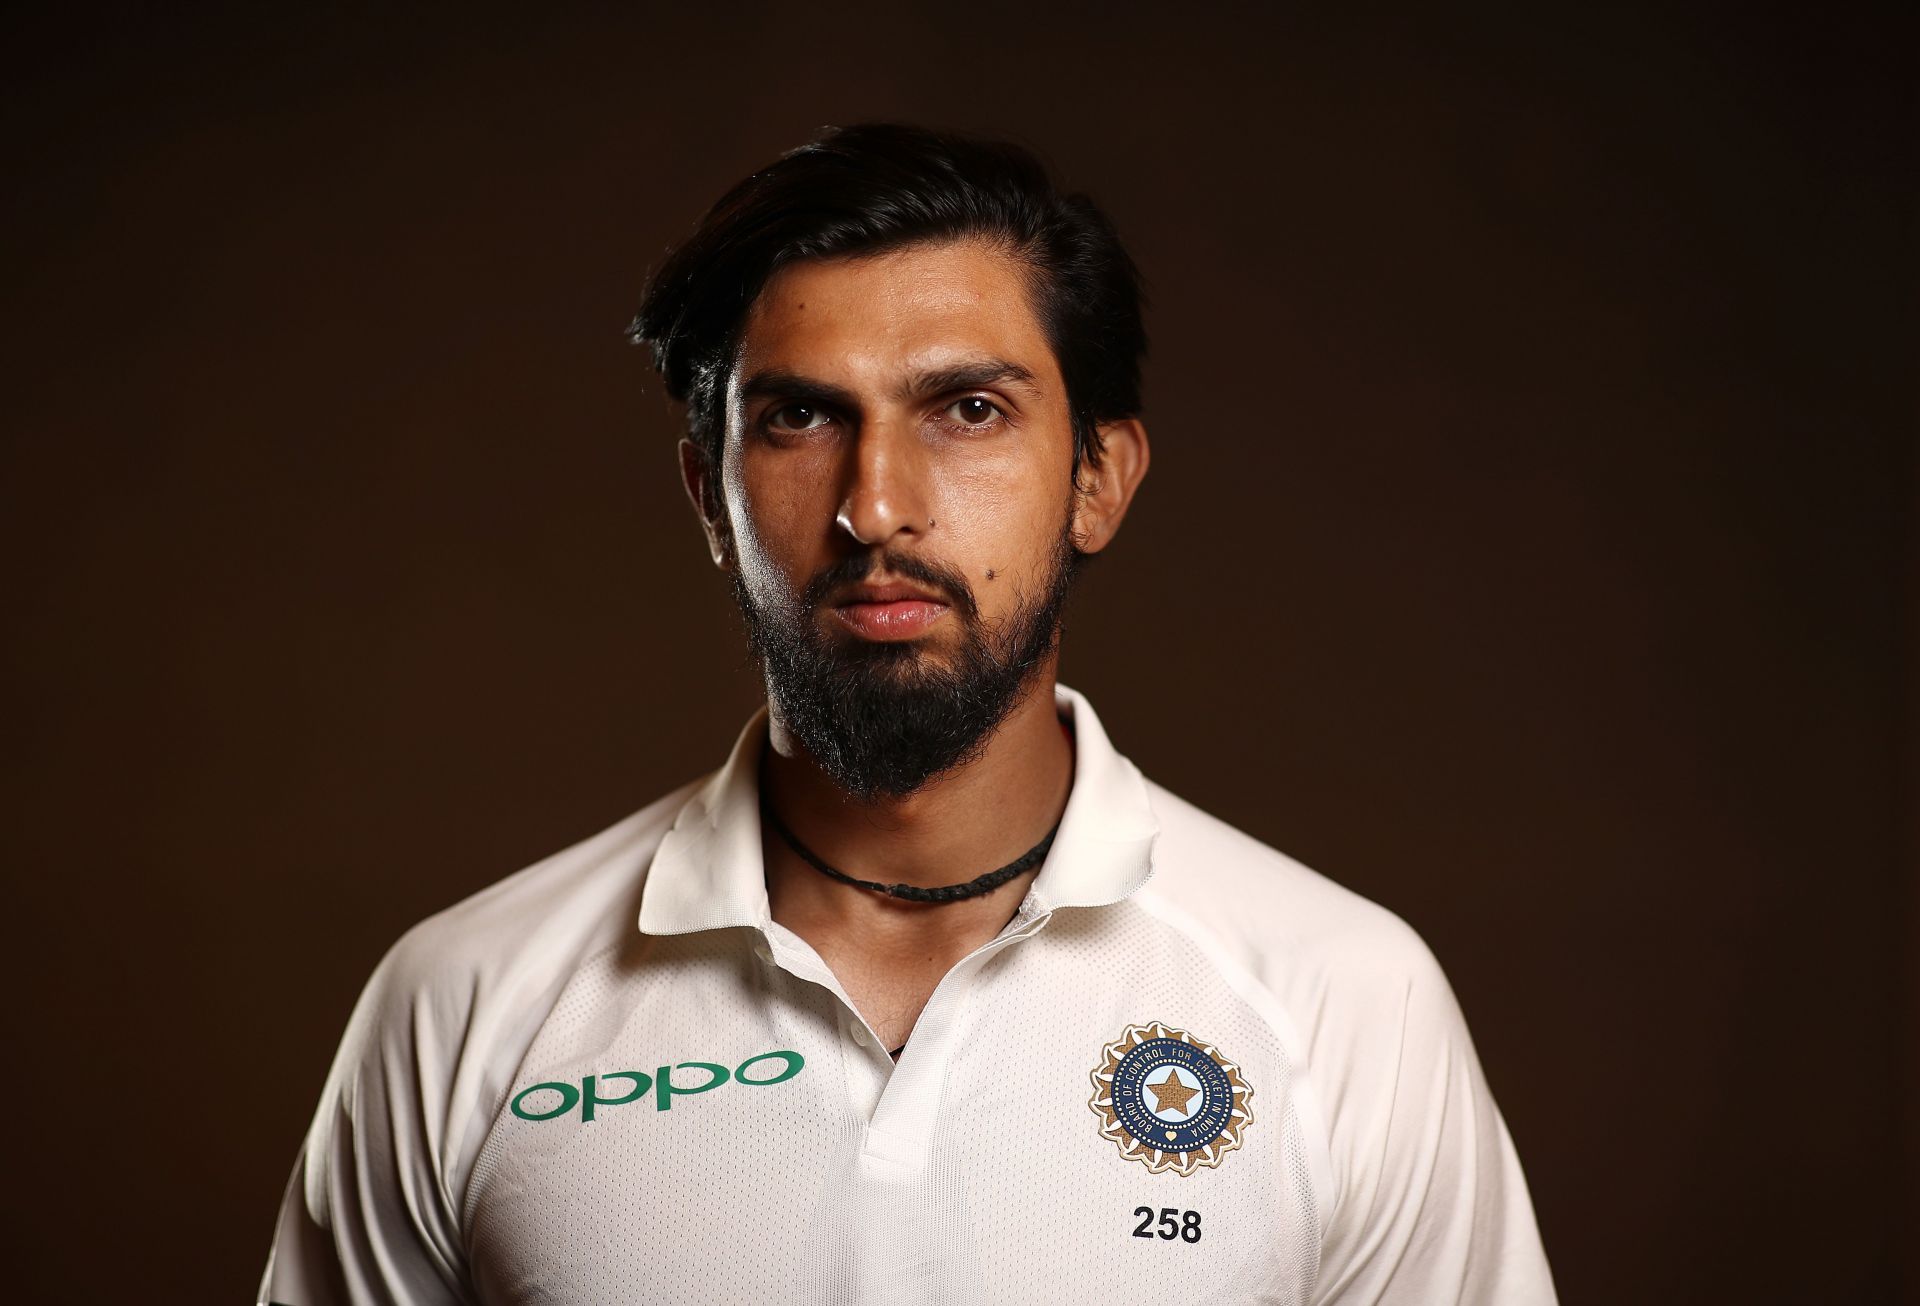 Ishant Sharma is one of the most experienced Indian cricketers